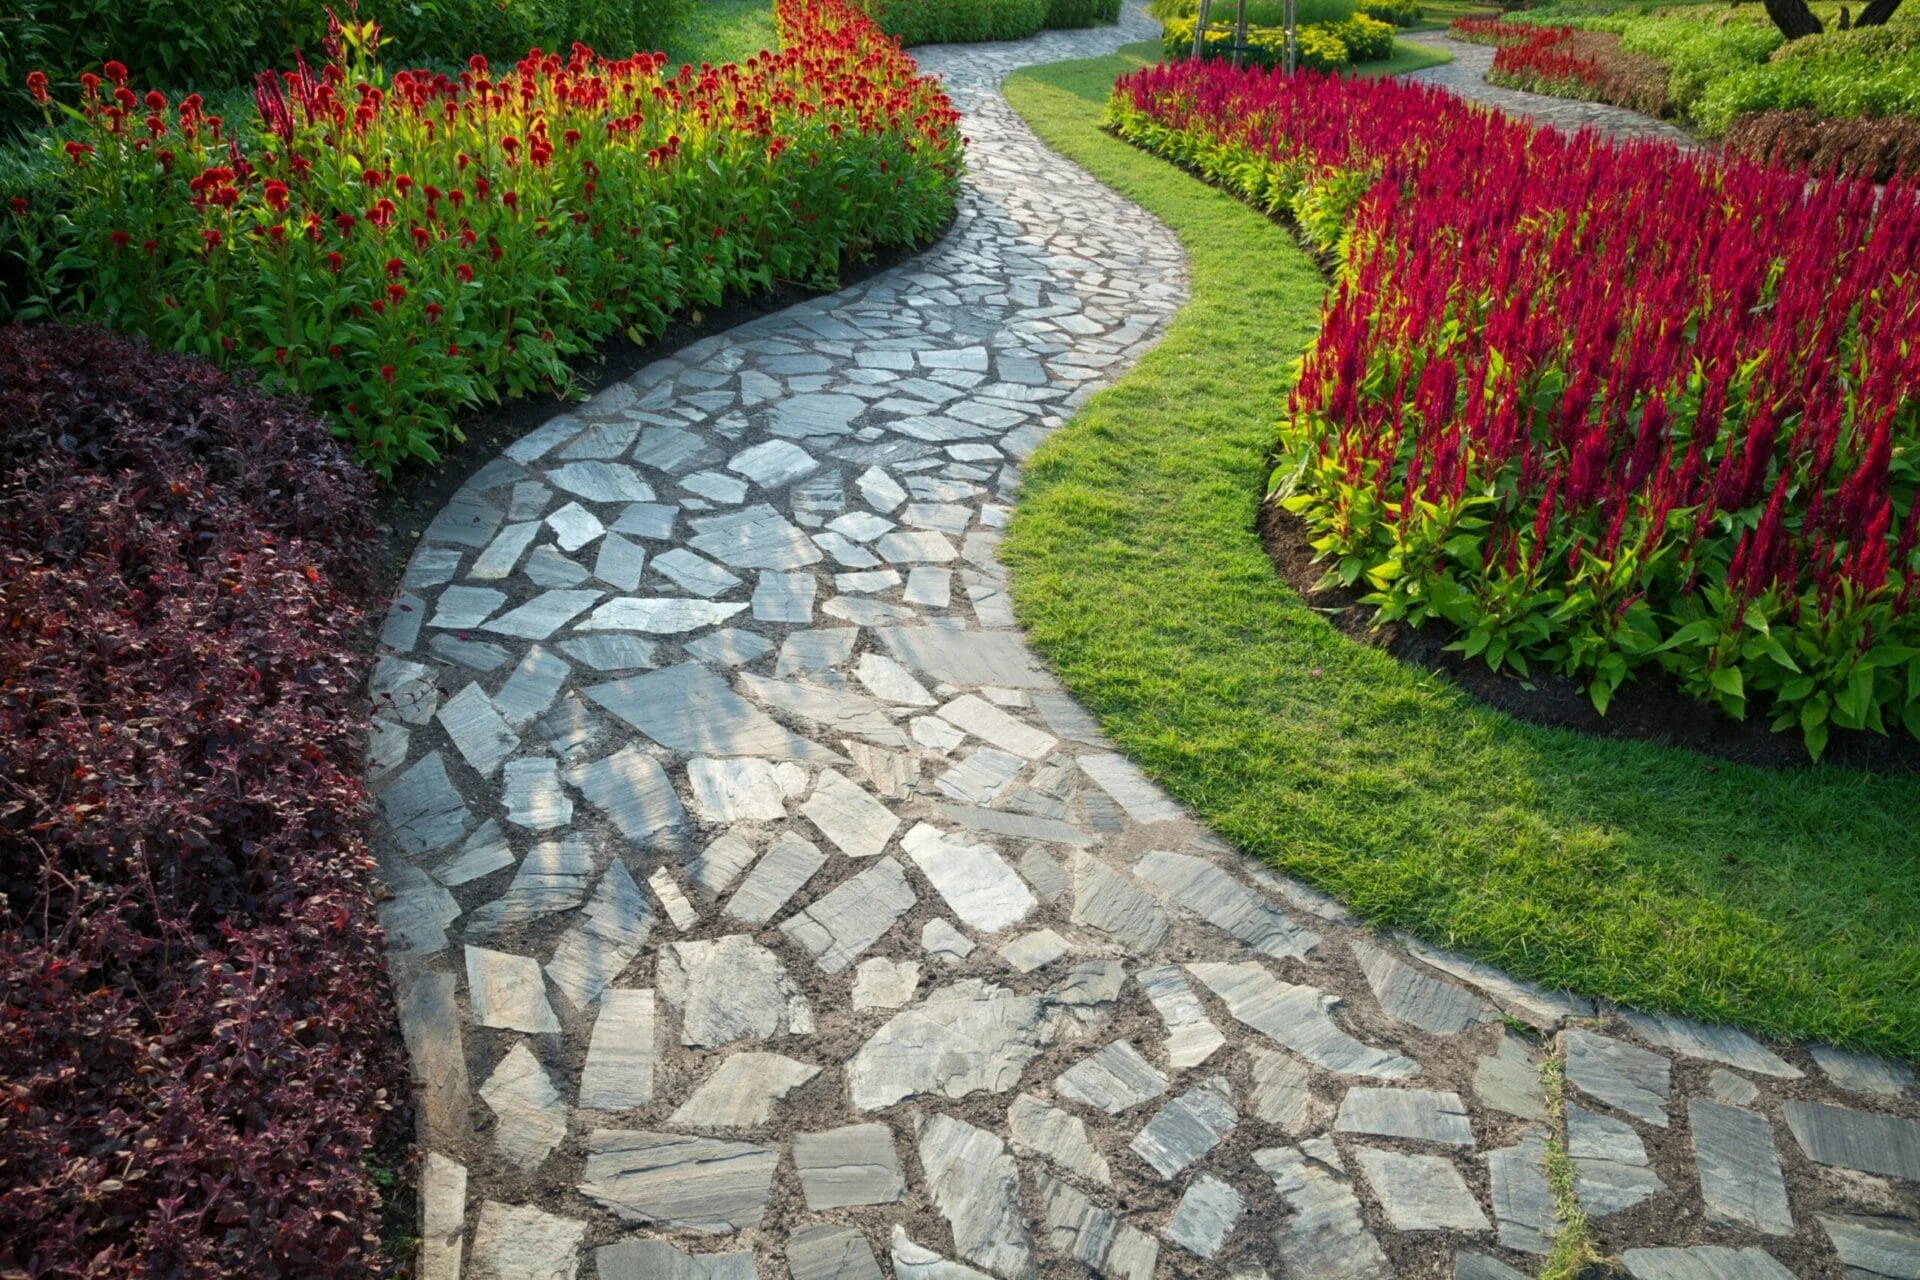 A curving paver stone pathway bordered by colorful red and yellow flowers in a well-manicured garden.